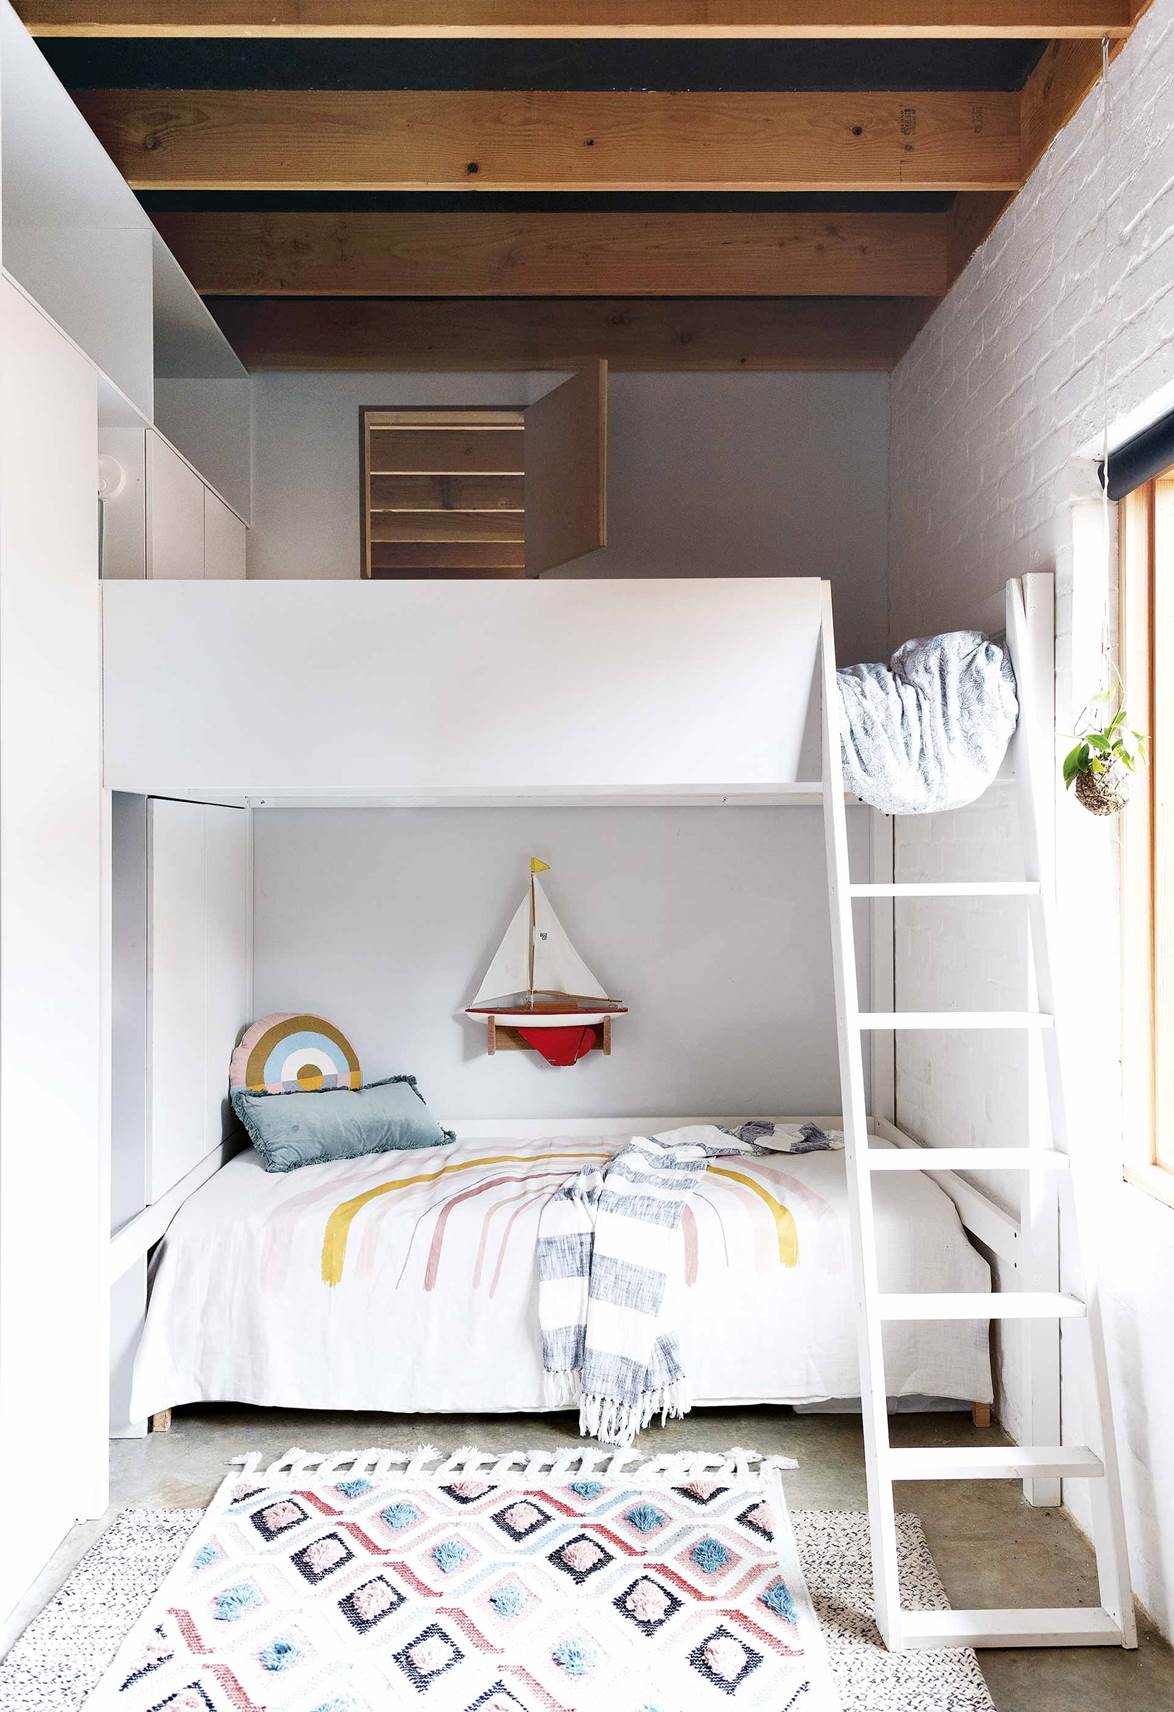 In the build of this small eco-friendly home in Perth, a custom double bunk bed was created to make the most of the compact footprint and tall ceilings of this kid's bedroom.